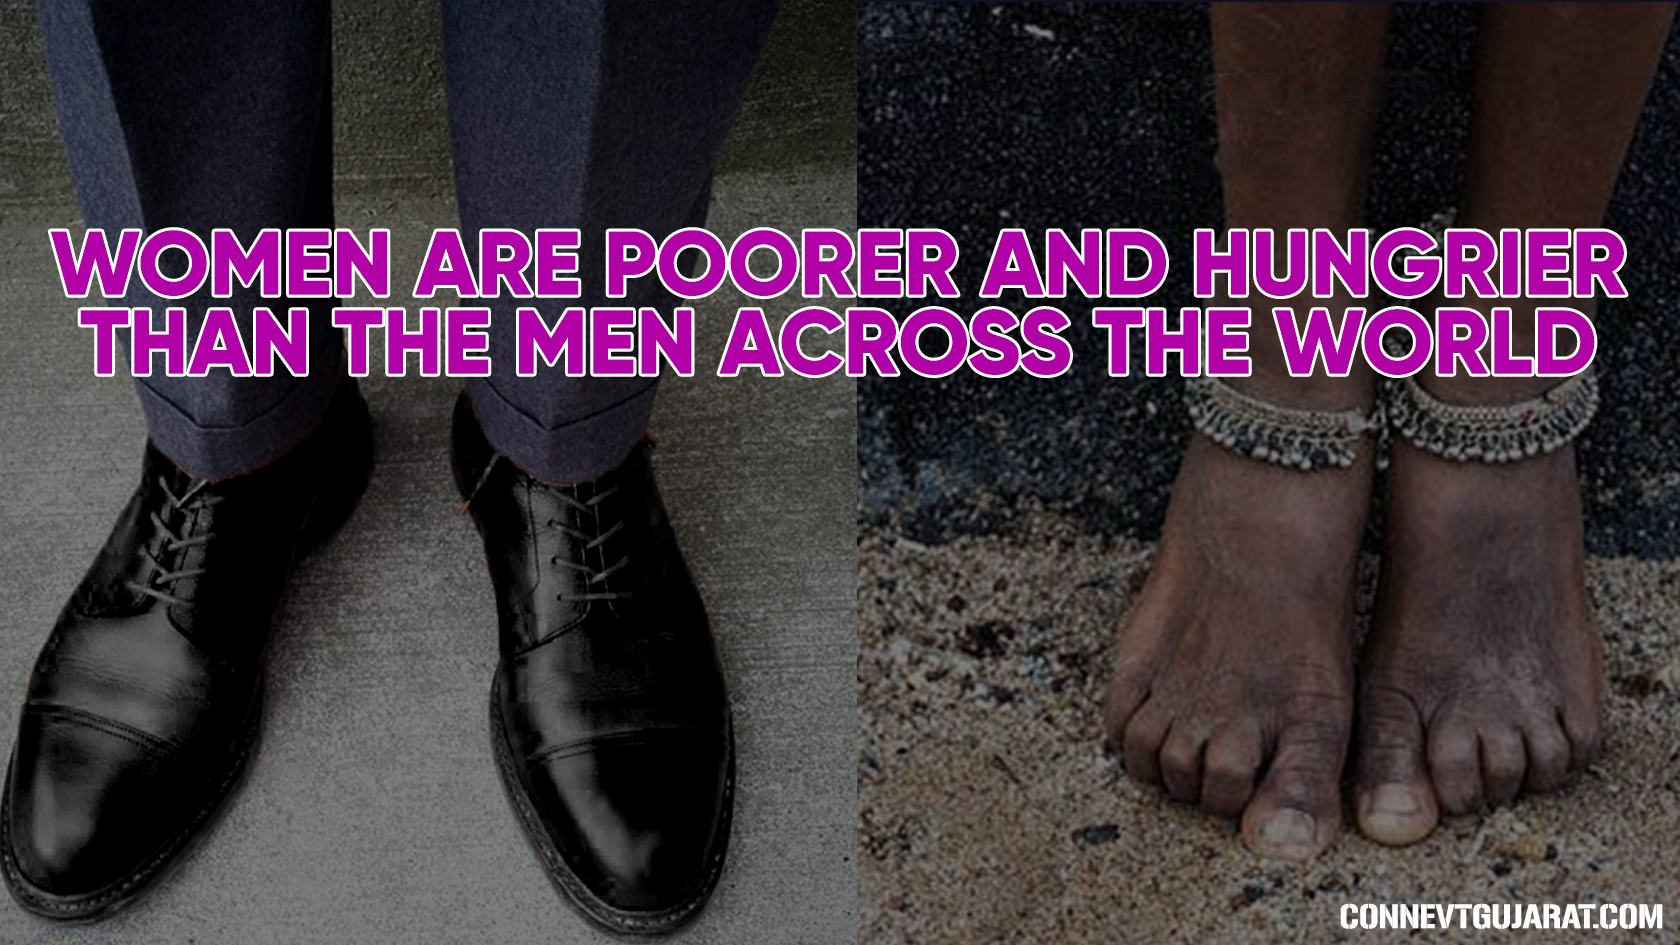 Women Are Poorer and Hungrier than the Men across the World